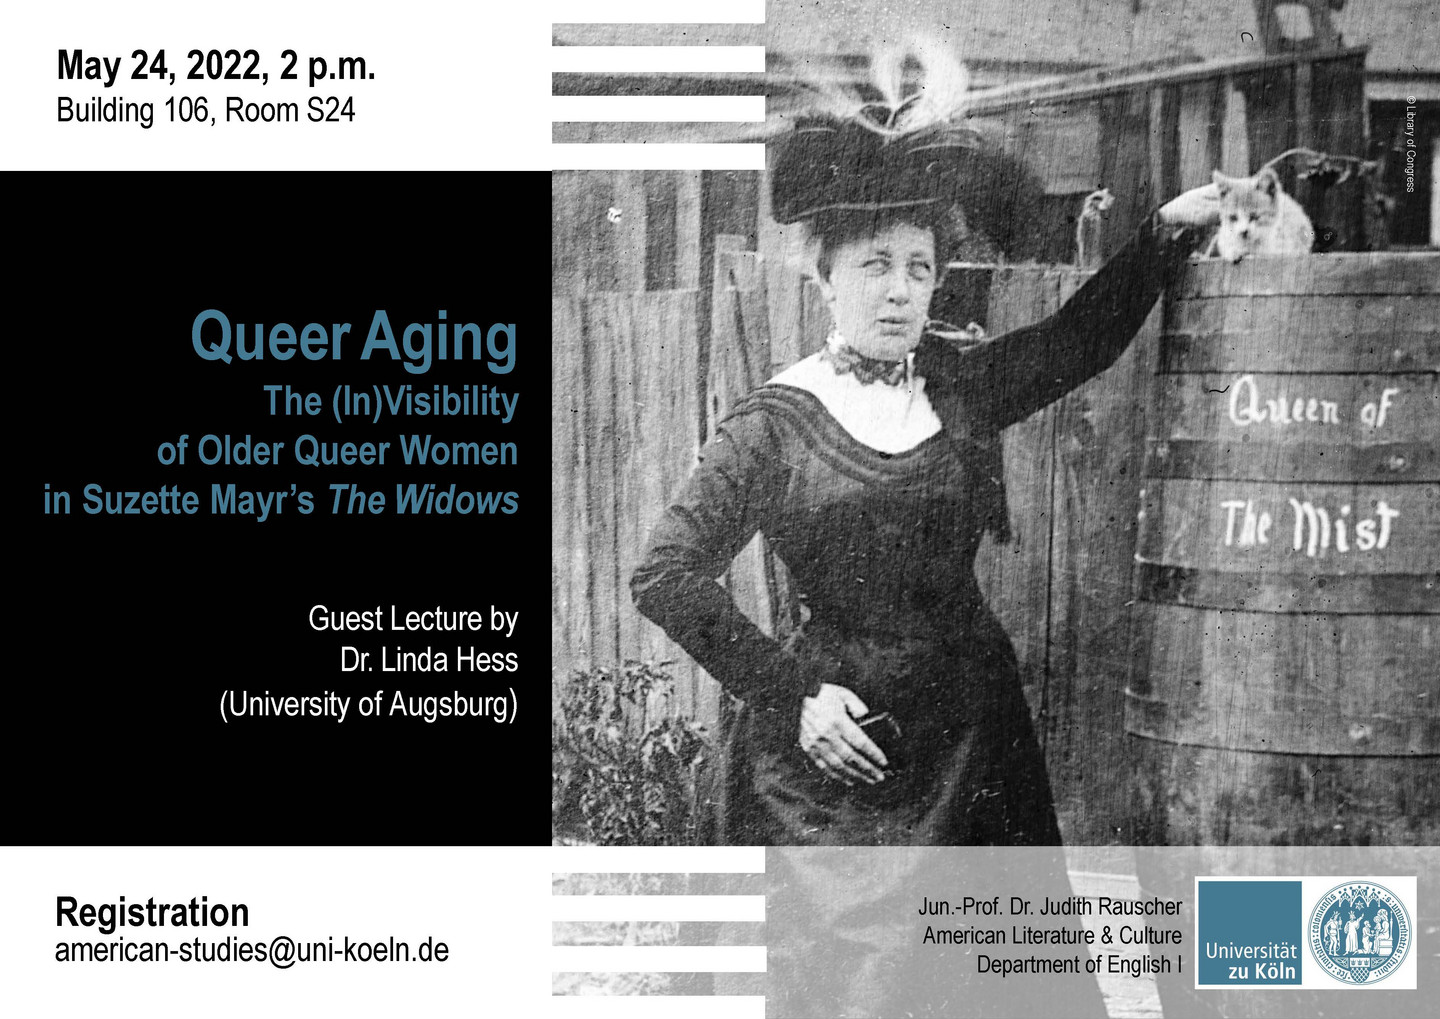 Poster for the Guest Lecture on "Queer Aging: The In/Visibility of Older Queer Women in Suzanne Mayr's 'The Widows'" featuring a photo of Annie Edson Taylor with the barrel she used to ride down Niagara Falls